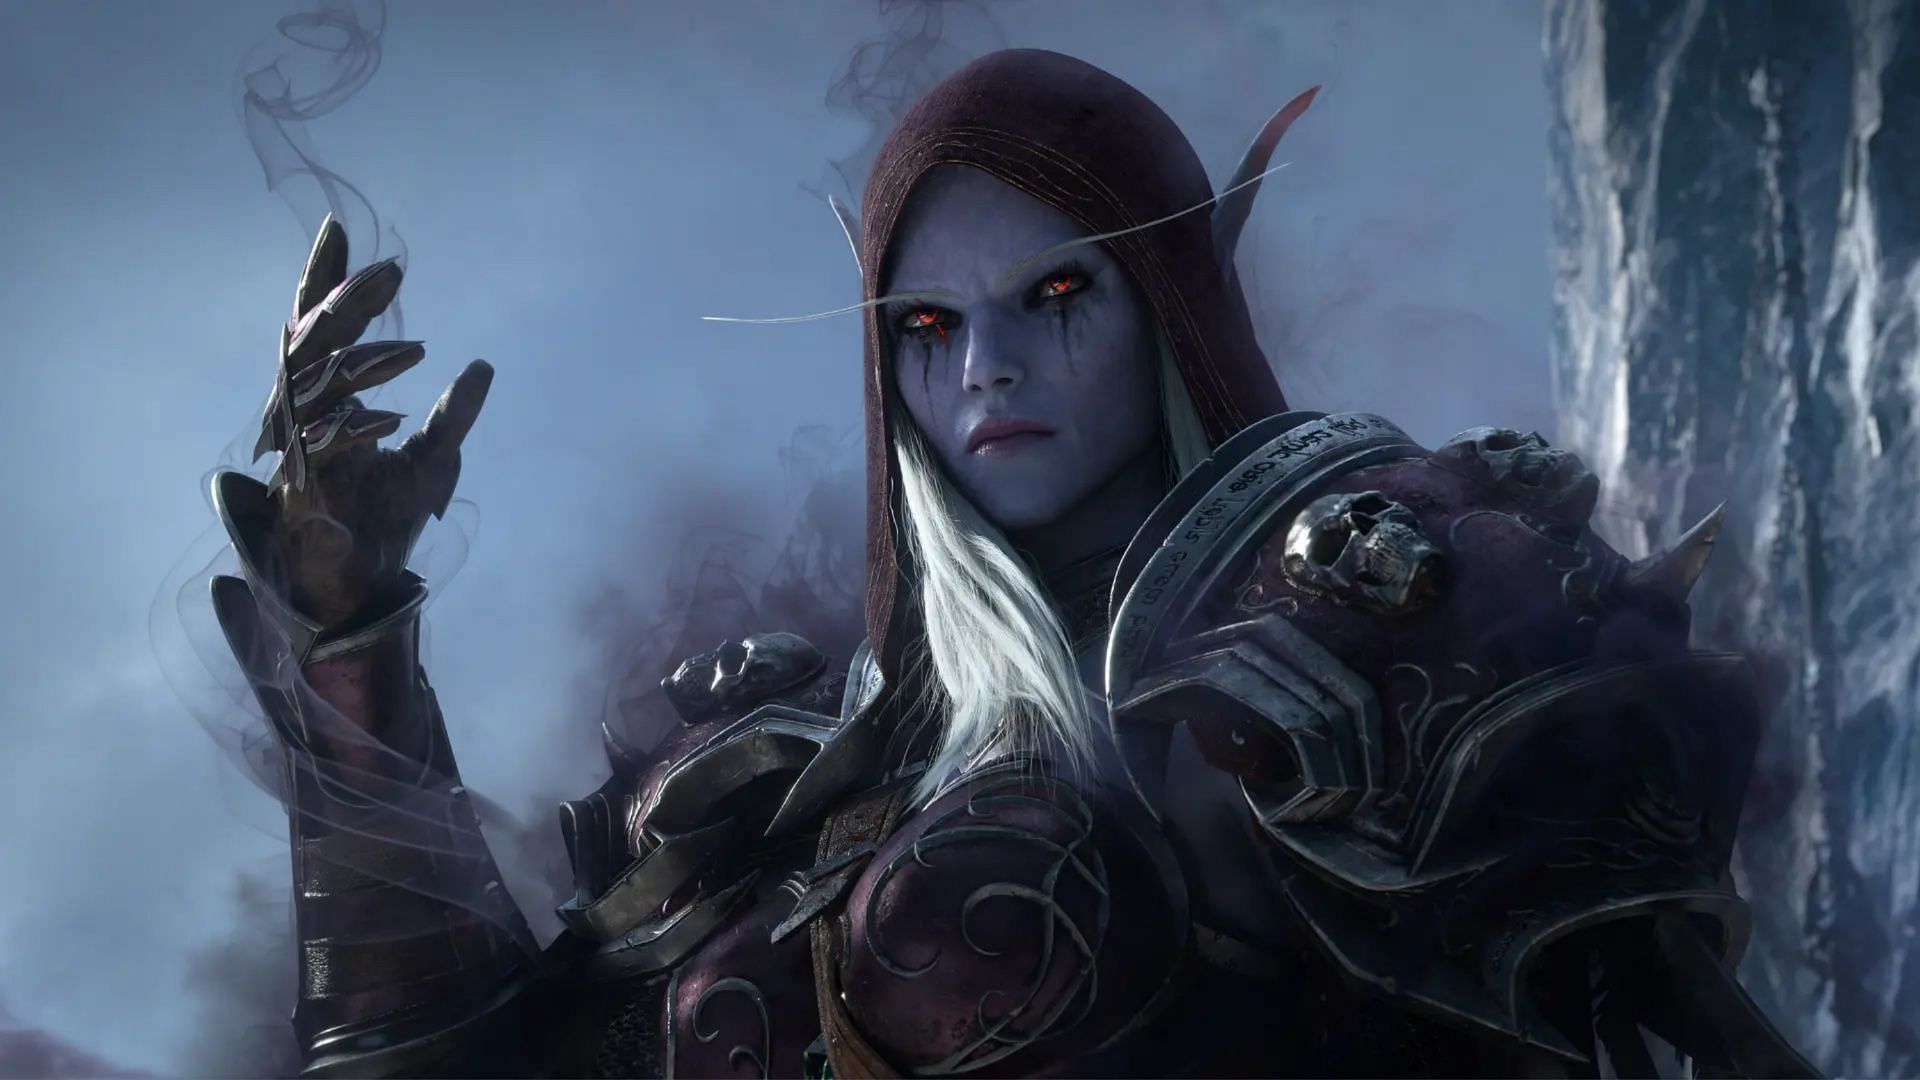 Could Sylvanas Windrunner actually return?